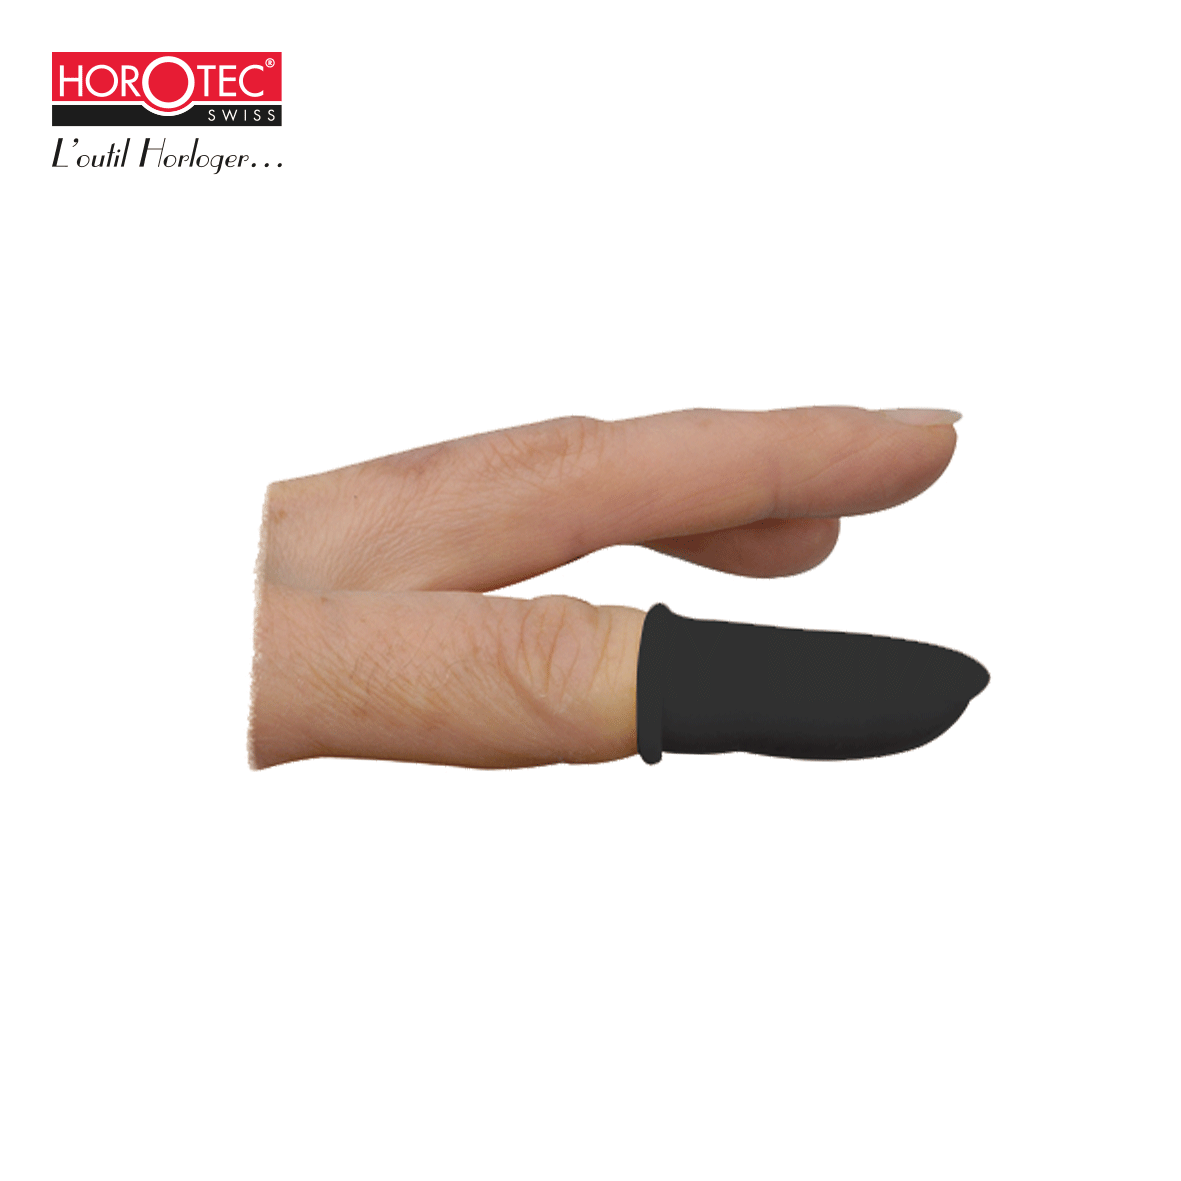 MSA26.268-M HOROTEC® ANTISTATIC (ESD) ROLLED FINGER COT IN 100% NATURAL LATEX, BLACK WITH POWDER / SIZE MEDIUM / BAG OF 100 PIECES